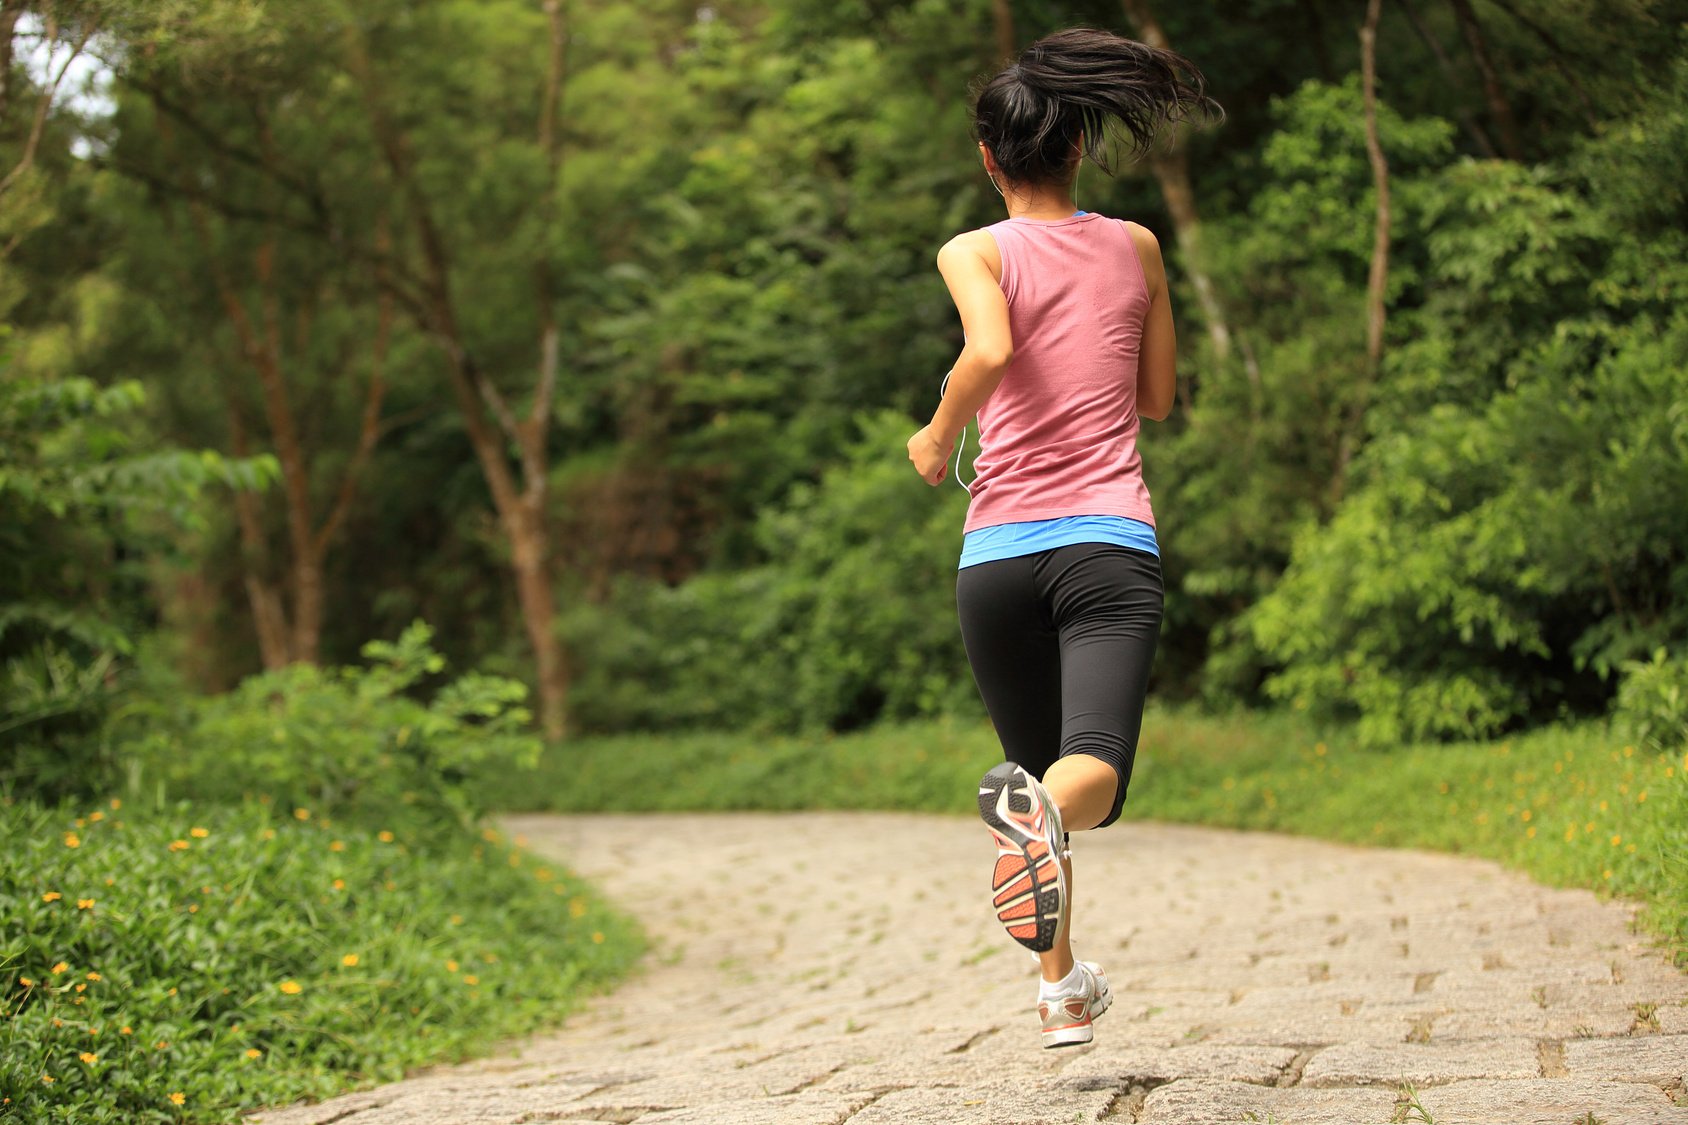 do you want to improve running cadence?